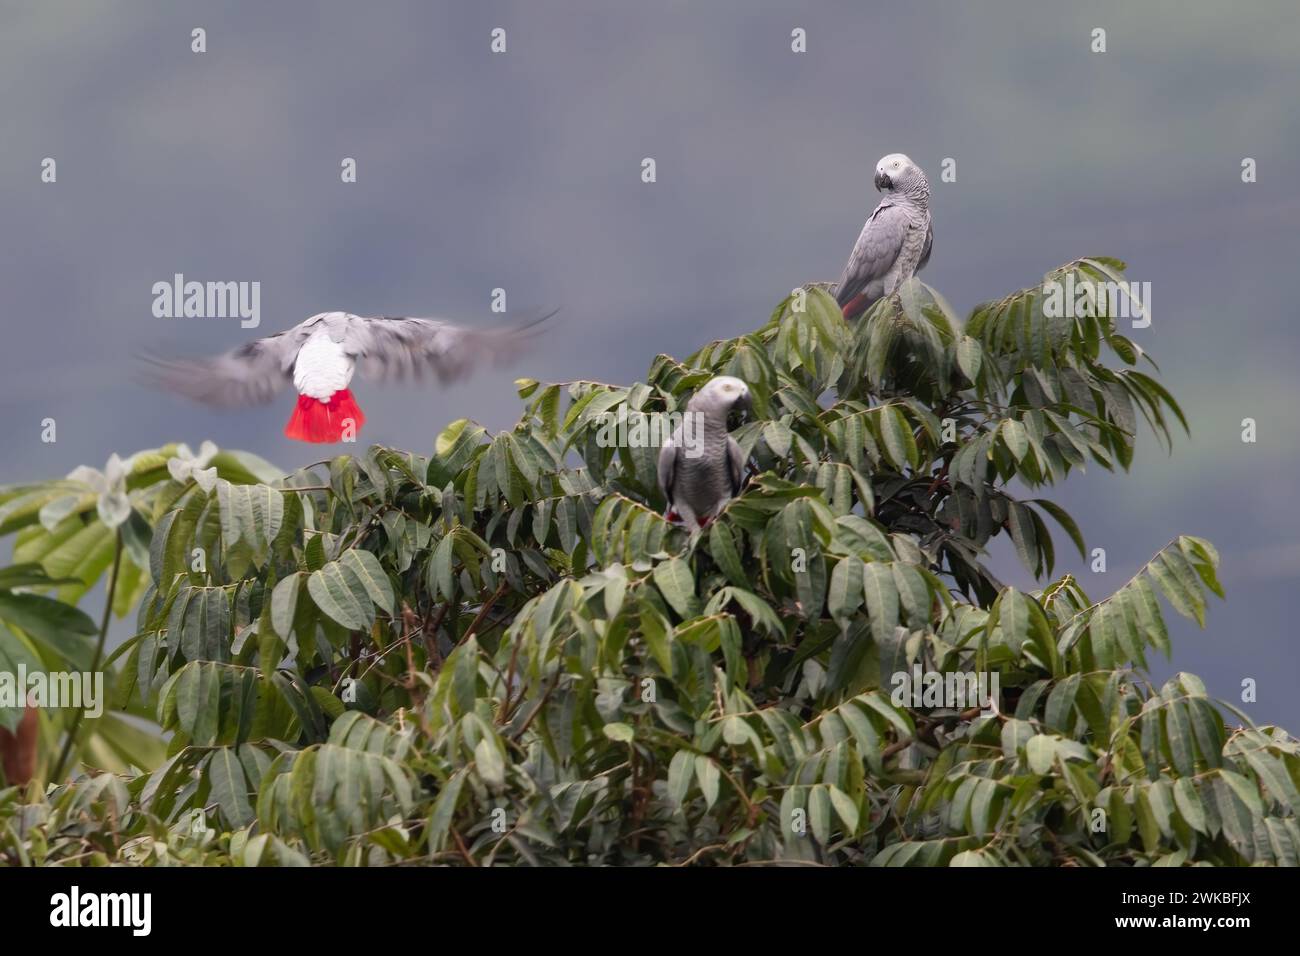 grey parrot (Psittacus erithacus), perched on top of a tree in a rainforest, One flying in, Equatorial Guinea, 1 Stock Photo